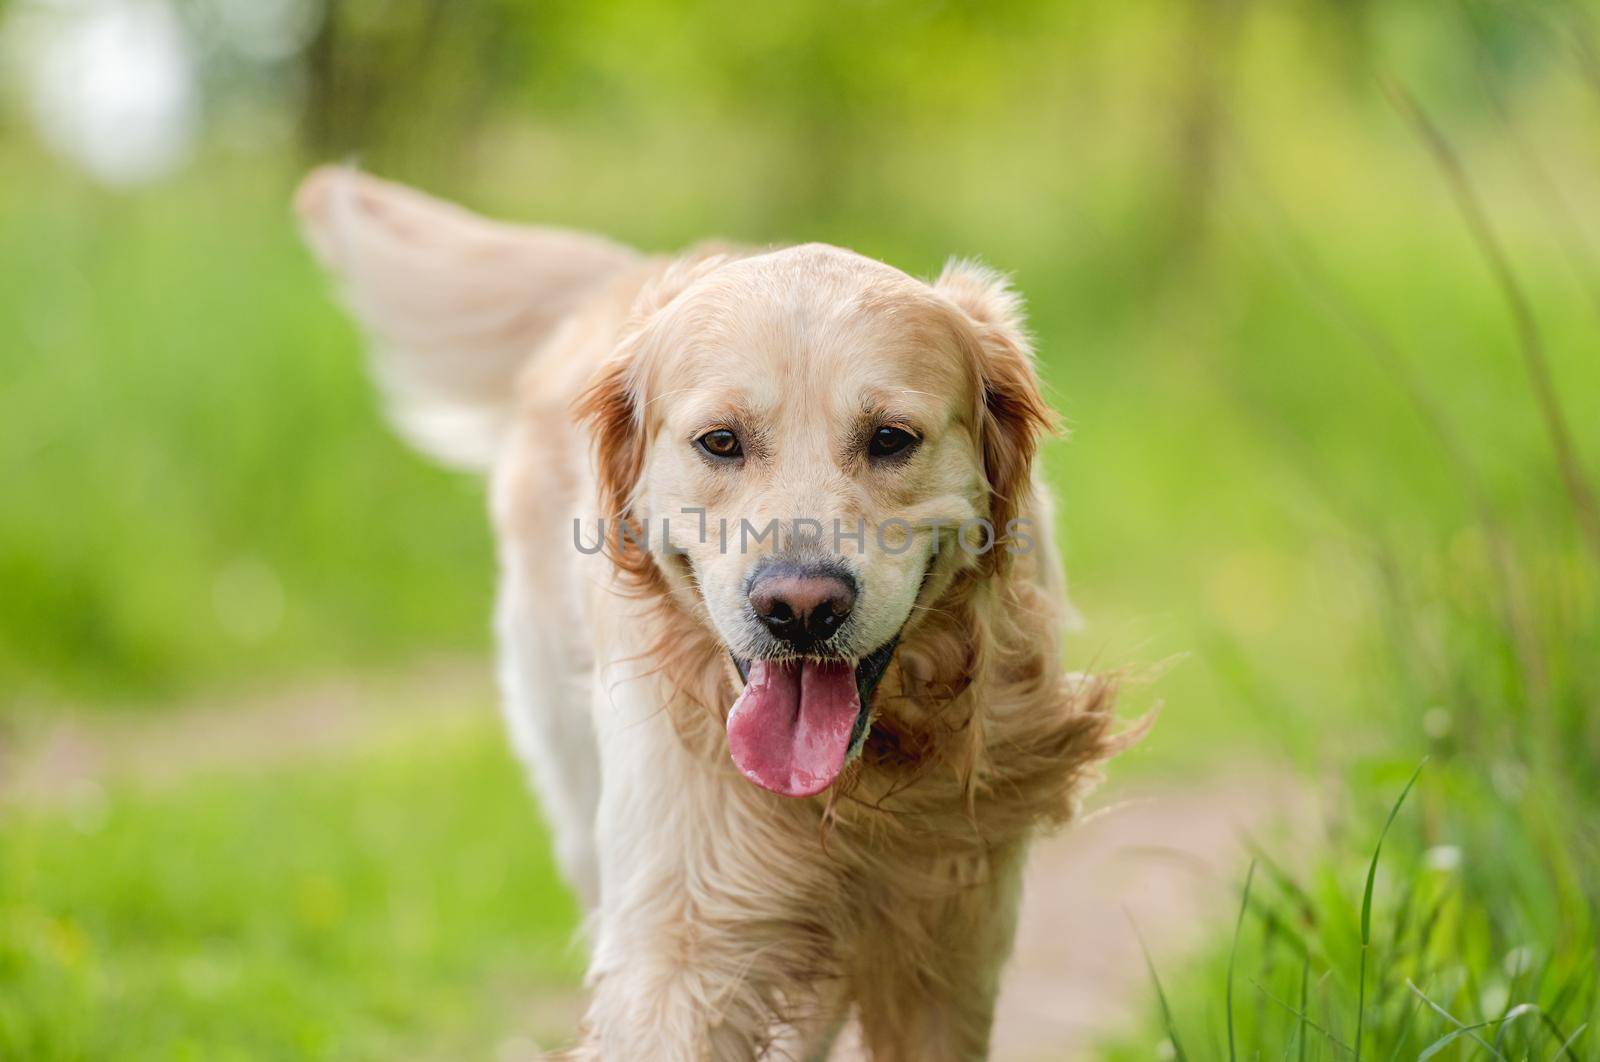 Adorable golden retriever dog walking outdoors in green grass at the nature in summer time with tonque out. Beautiful closeup portrait of doggy pet outside